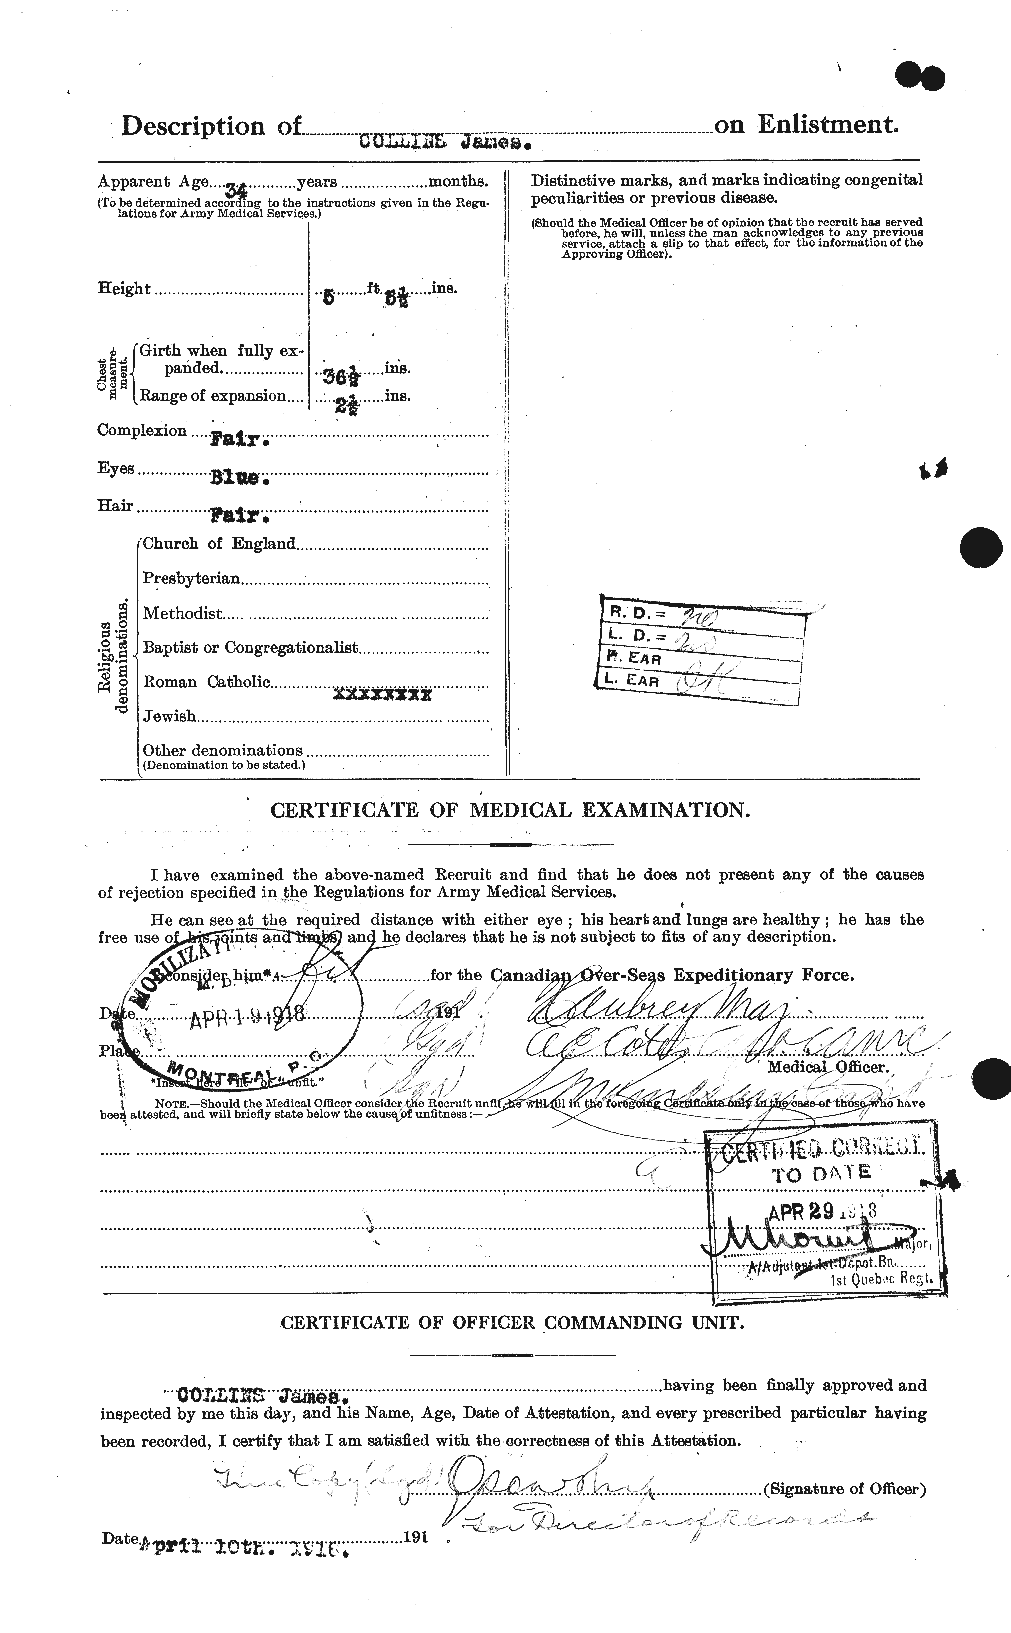 Personnel Records of the First World War - CEF 069980b